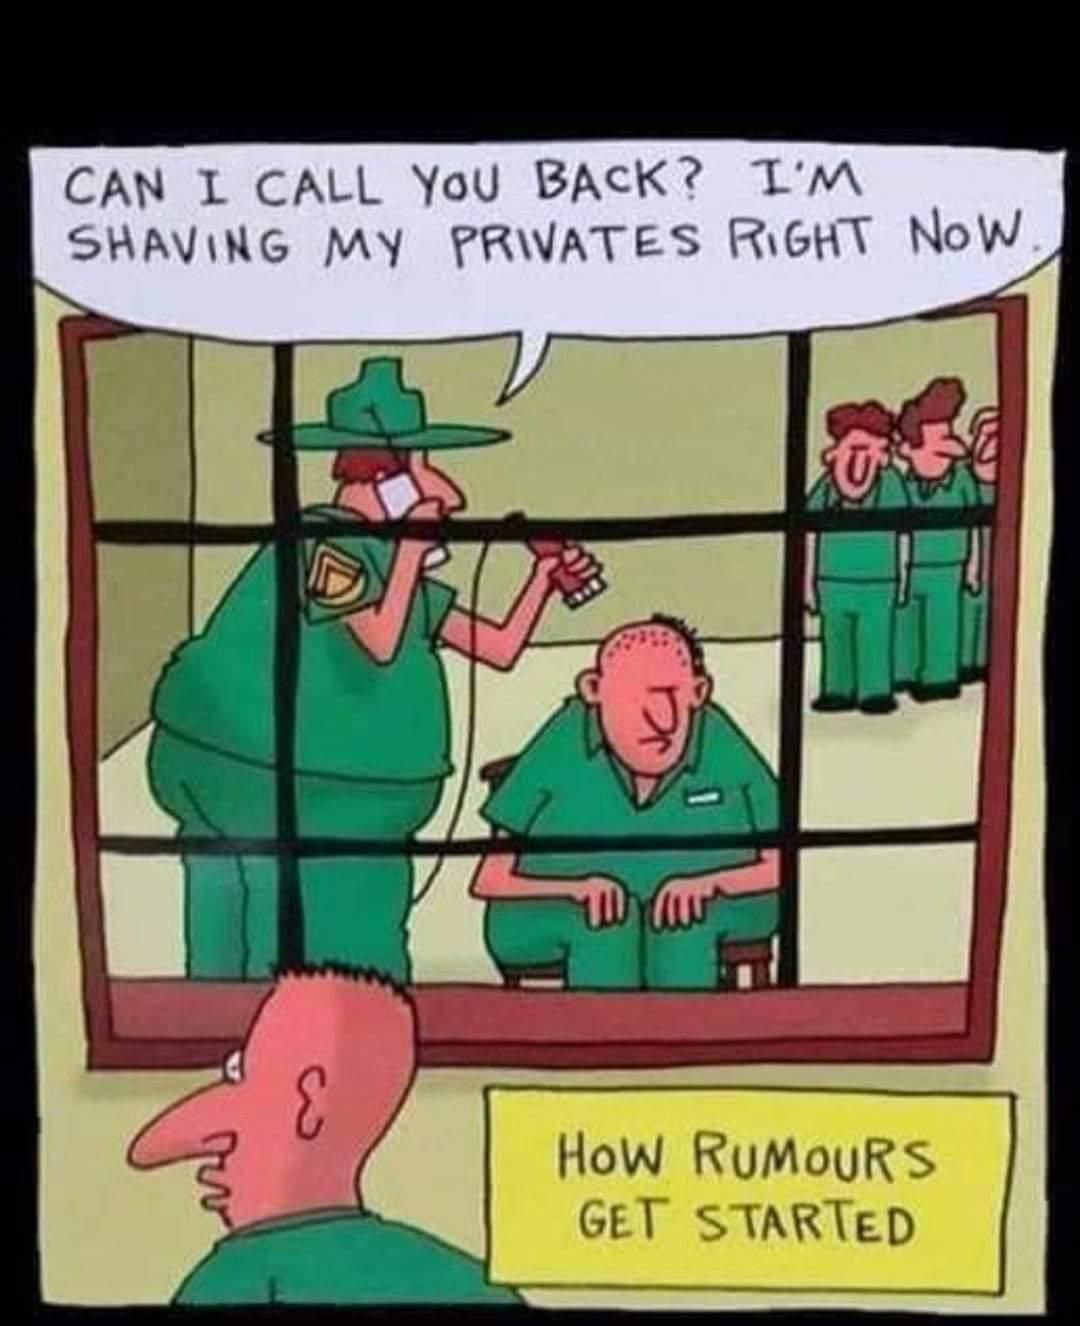 How rumours get started